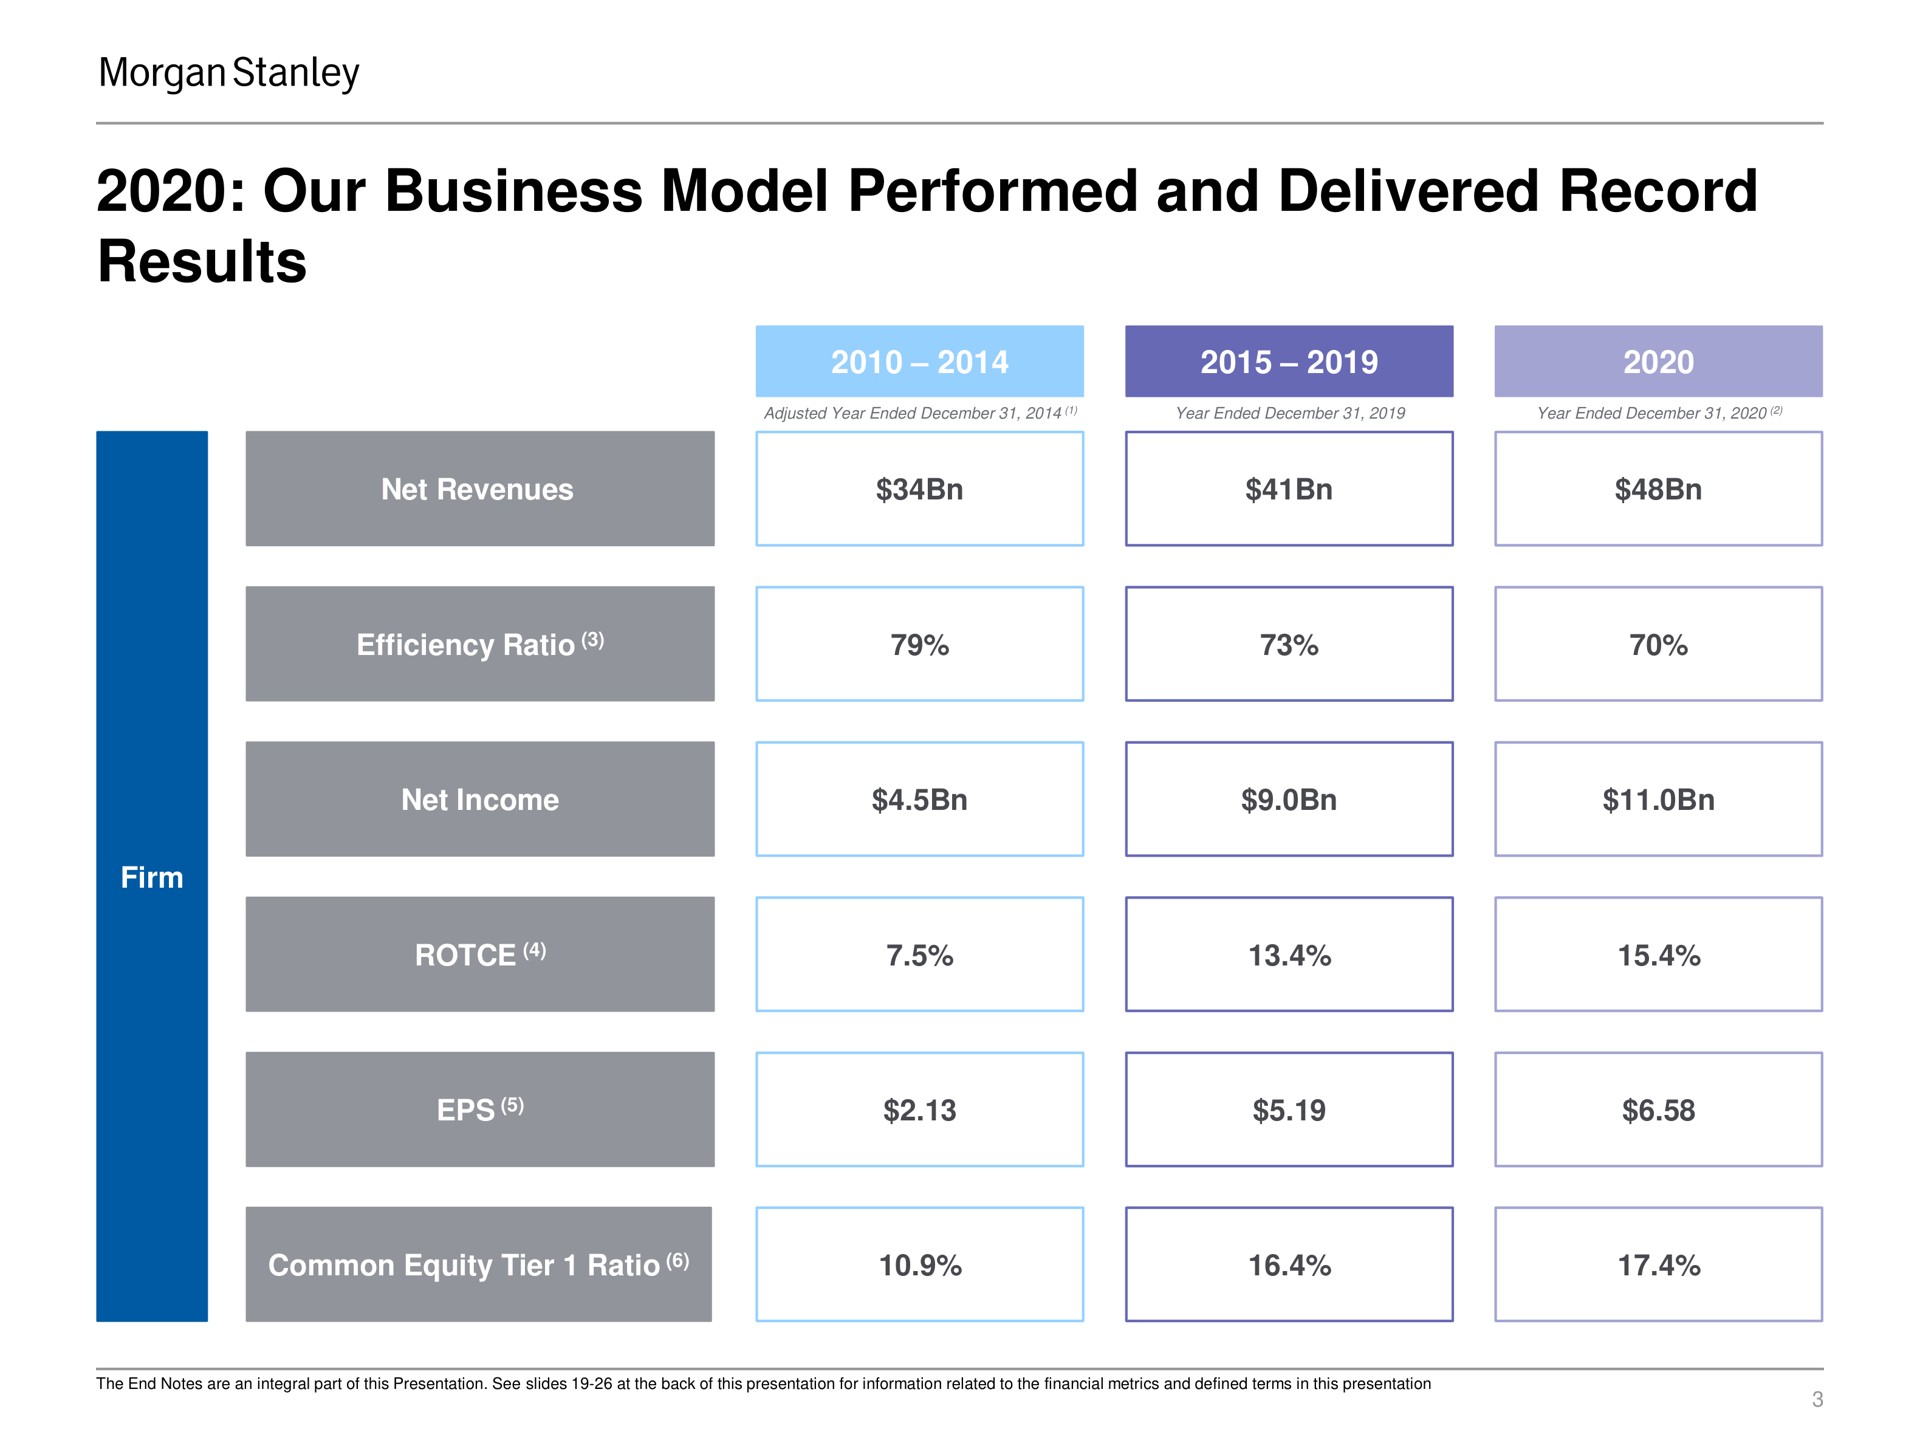 our business model performed and delivered record results | Morgan Stanley